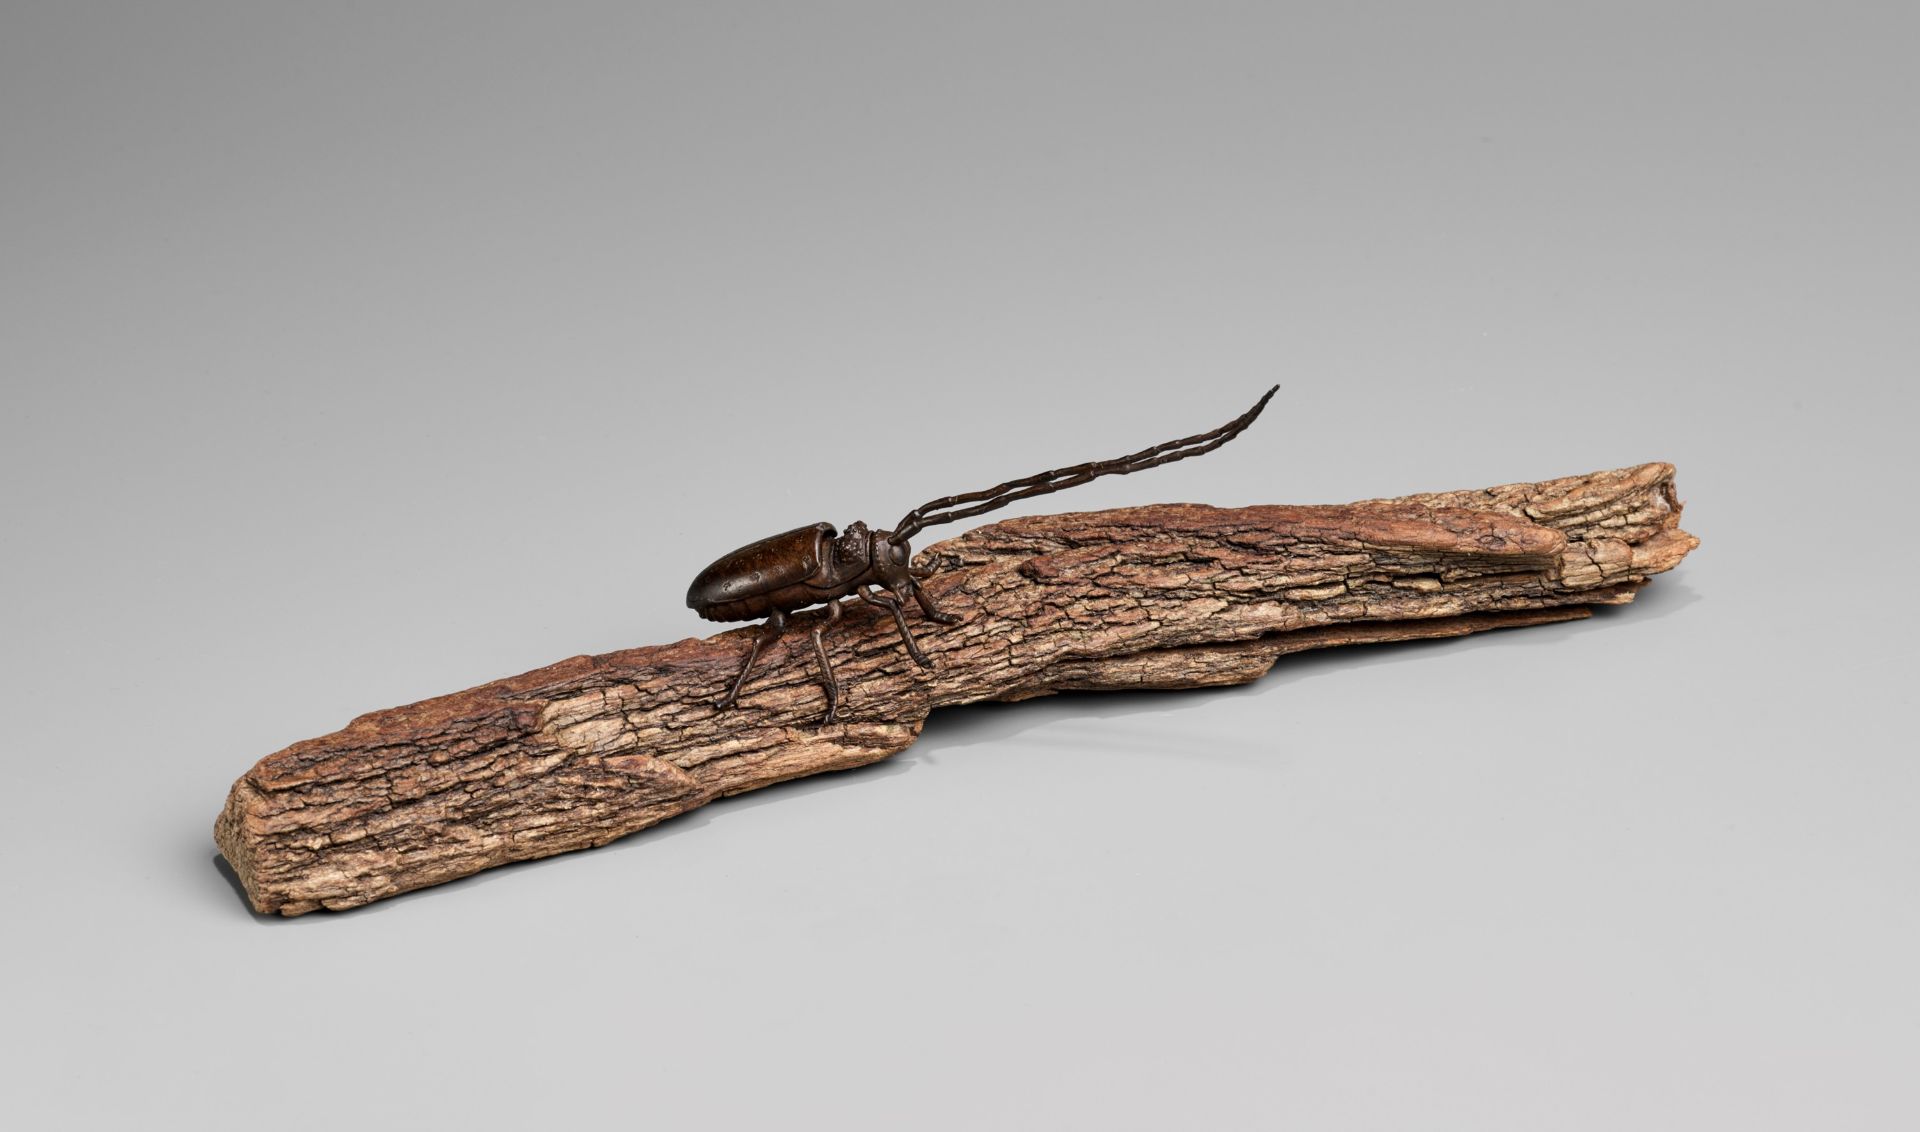 AN ARTICULATED BRONZE OKIMONO OF A SAWYER BEETLE CLIMBING A ROOTWOOD LOG